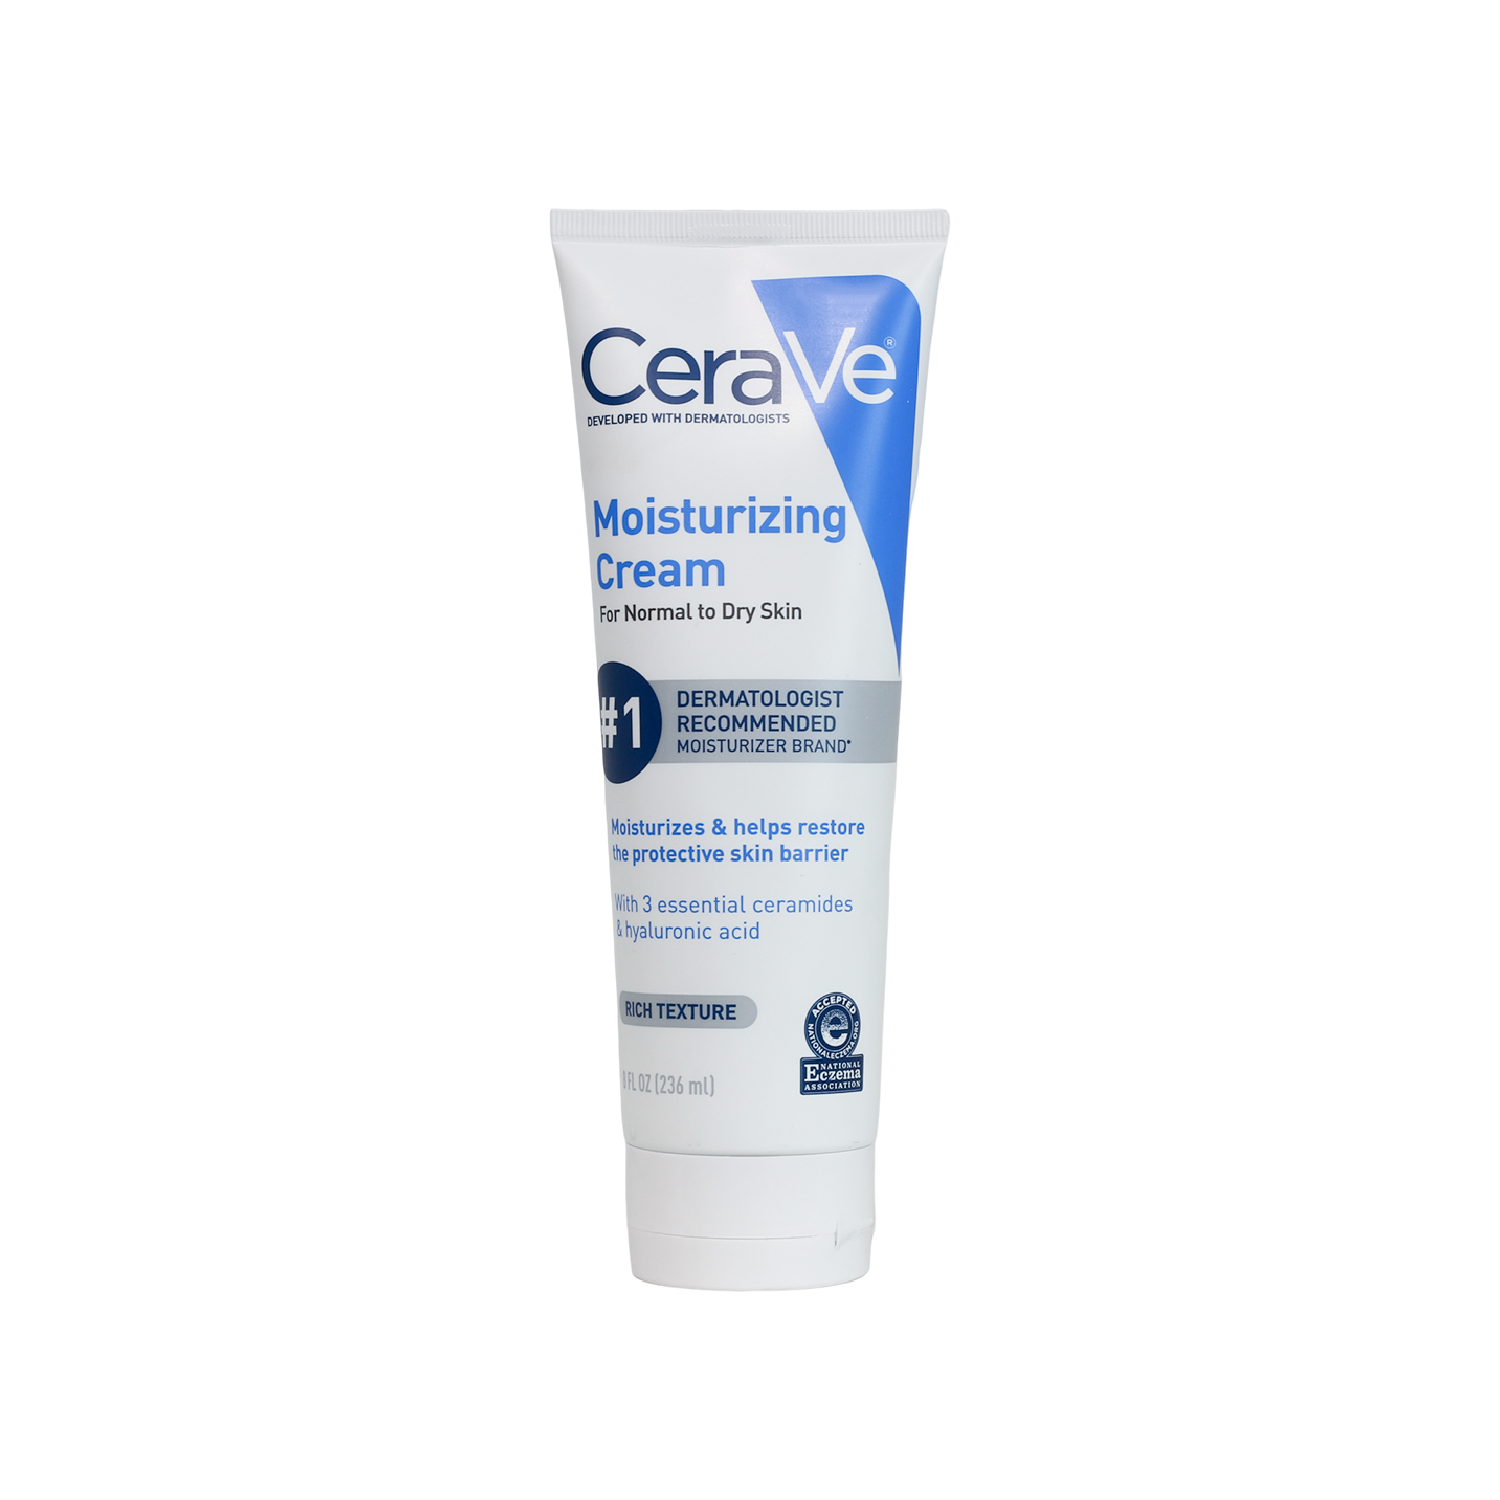 Cerave Moisturizing Cream For Normal to Dry Skin